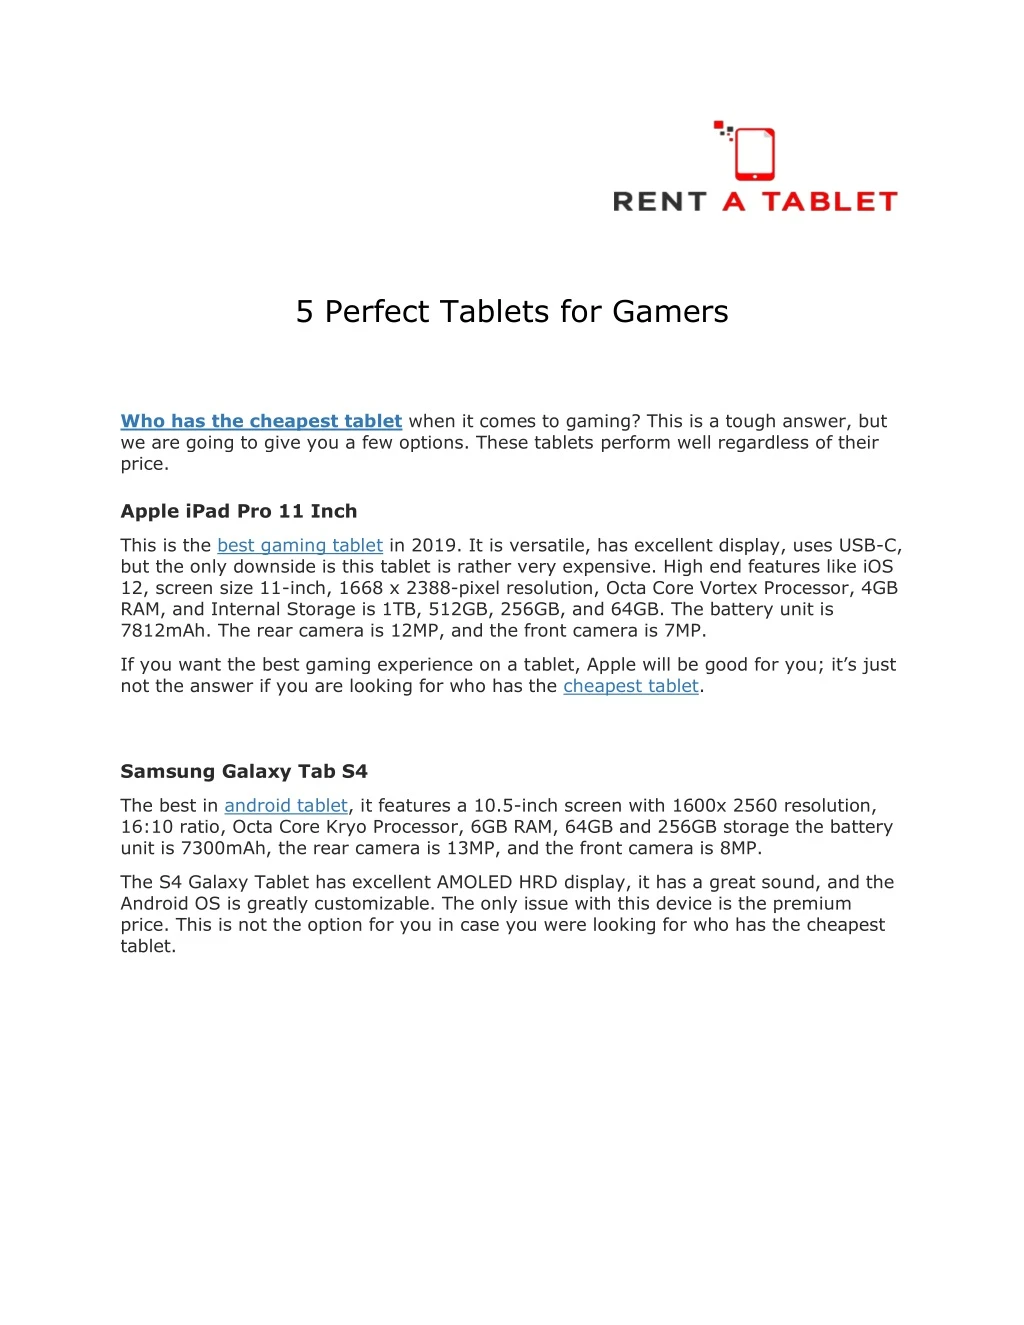 5 perfect tablets for gamers